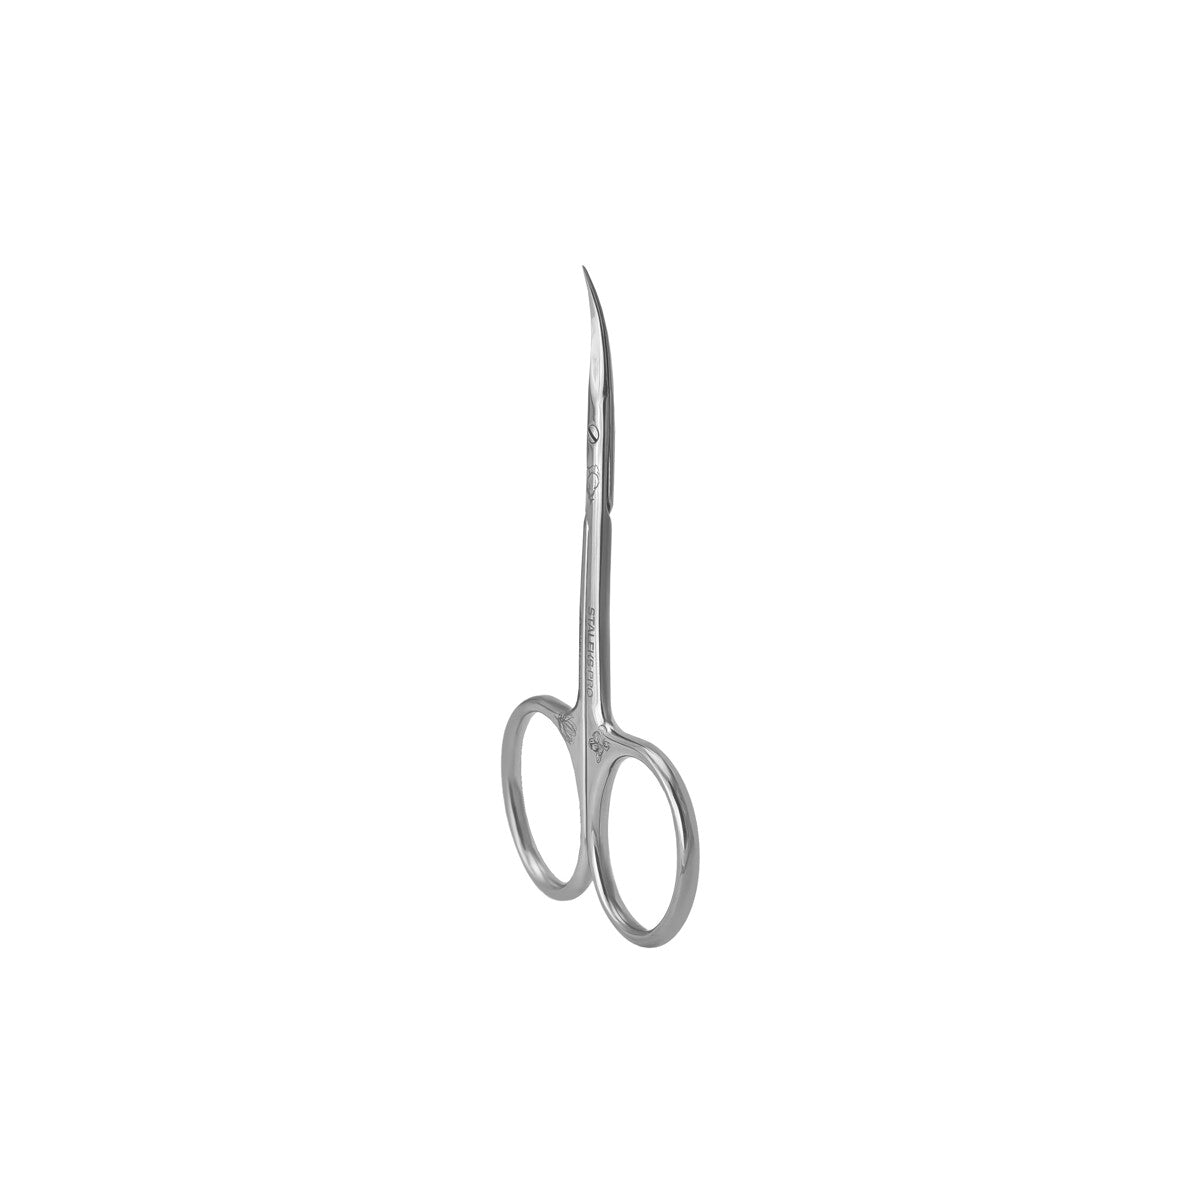    Staleks_Professional_cuticle_scissors_Exc._20_TYPE_2_Magnol._SX-20_2M_5 product view angle 